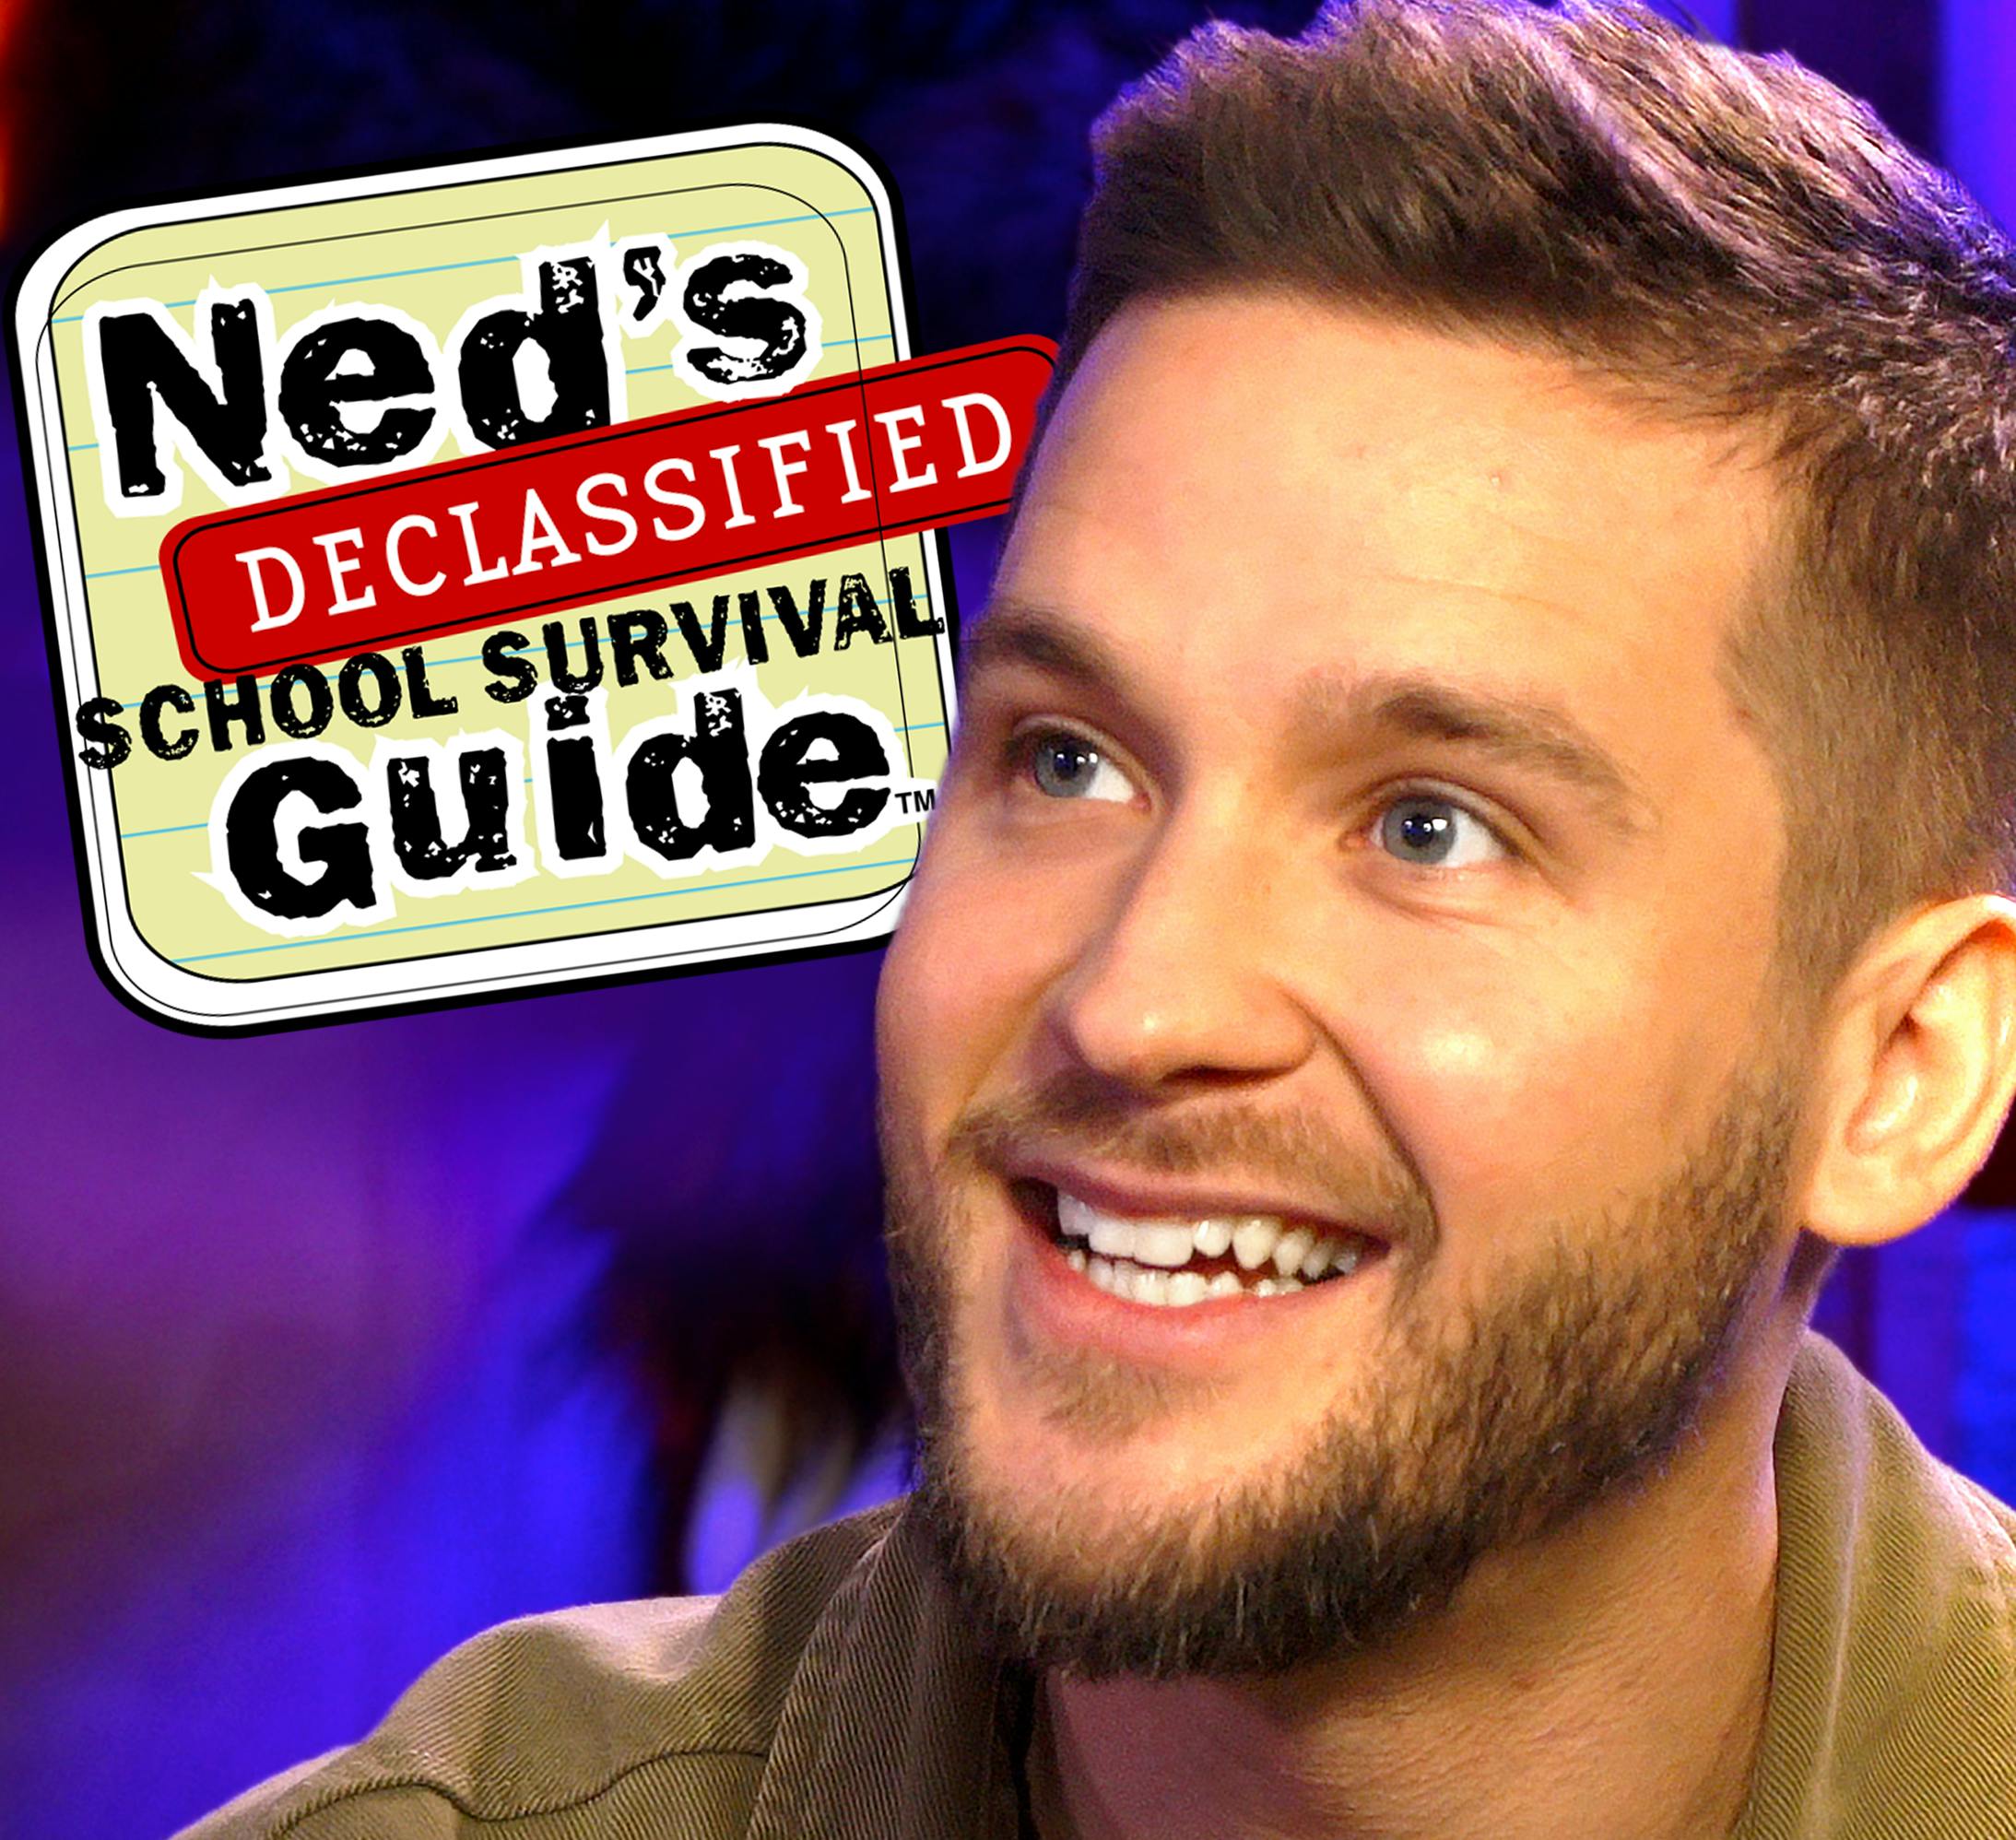 I Spent a Day with The Cast of Ned’s Declassified School Survival Guide